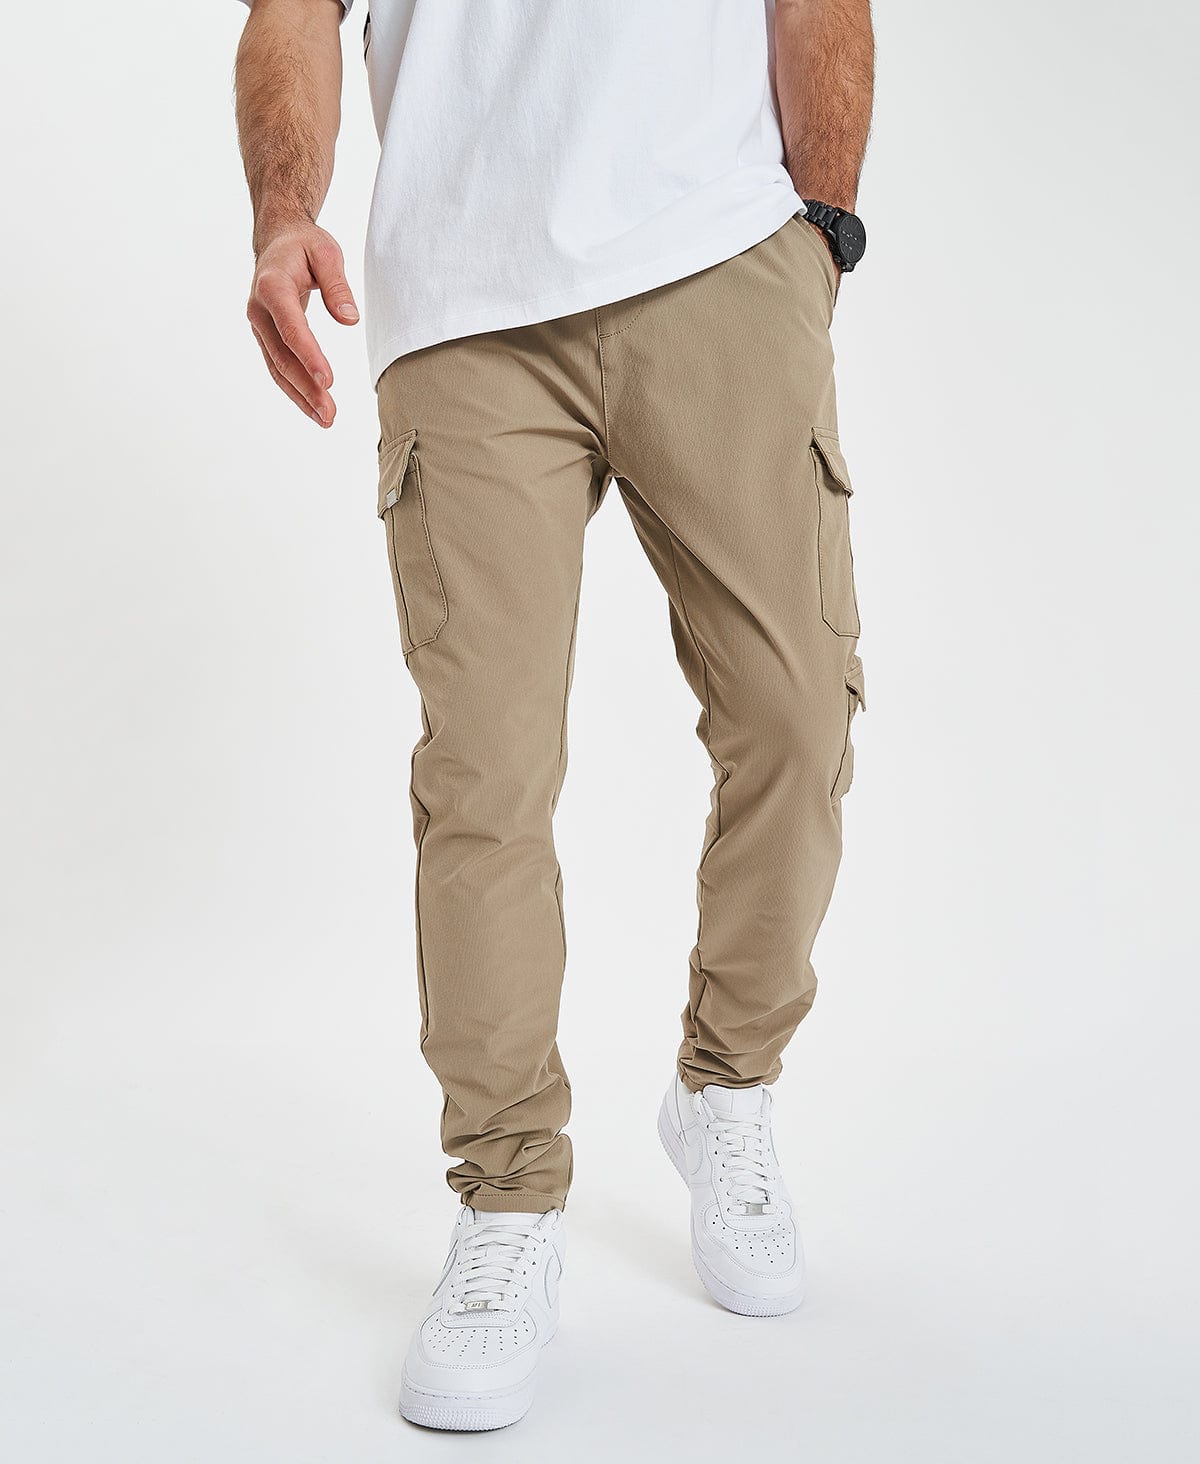 Military Cargo Jogger Pants For Men Slim Fit Autumn Skinny Mens Skinny  Cargo Trousers With Hip Hop Style H1223 From Mengyang04, $12.2 | DHgate.Com